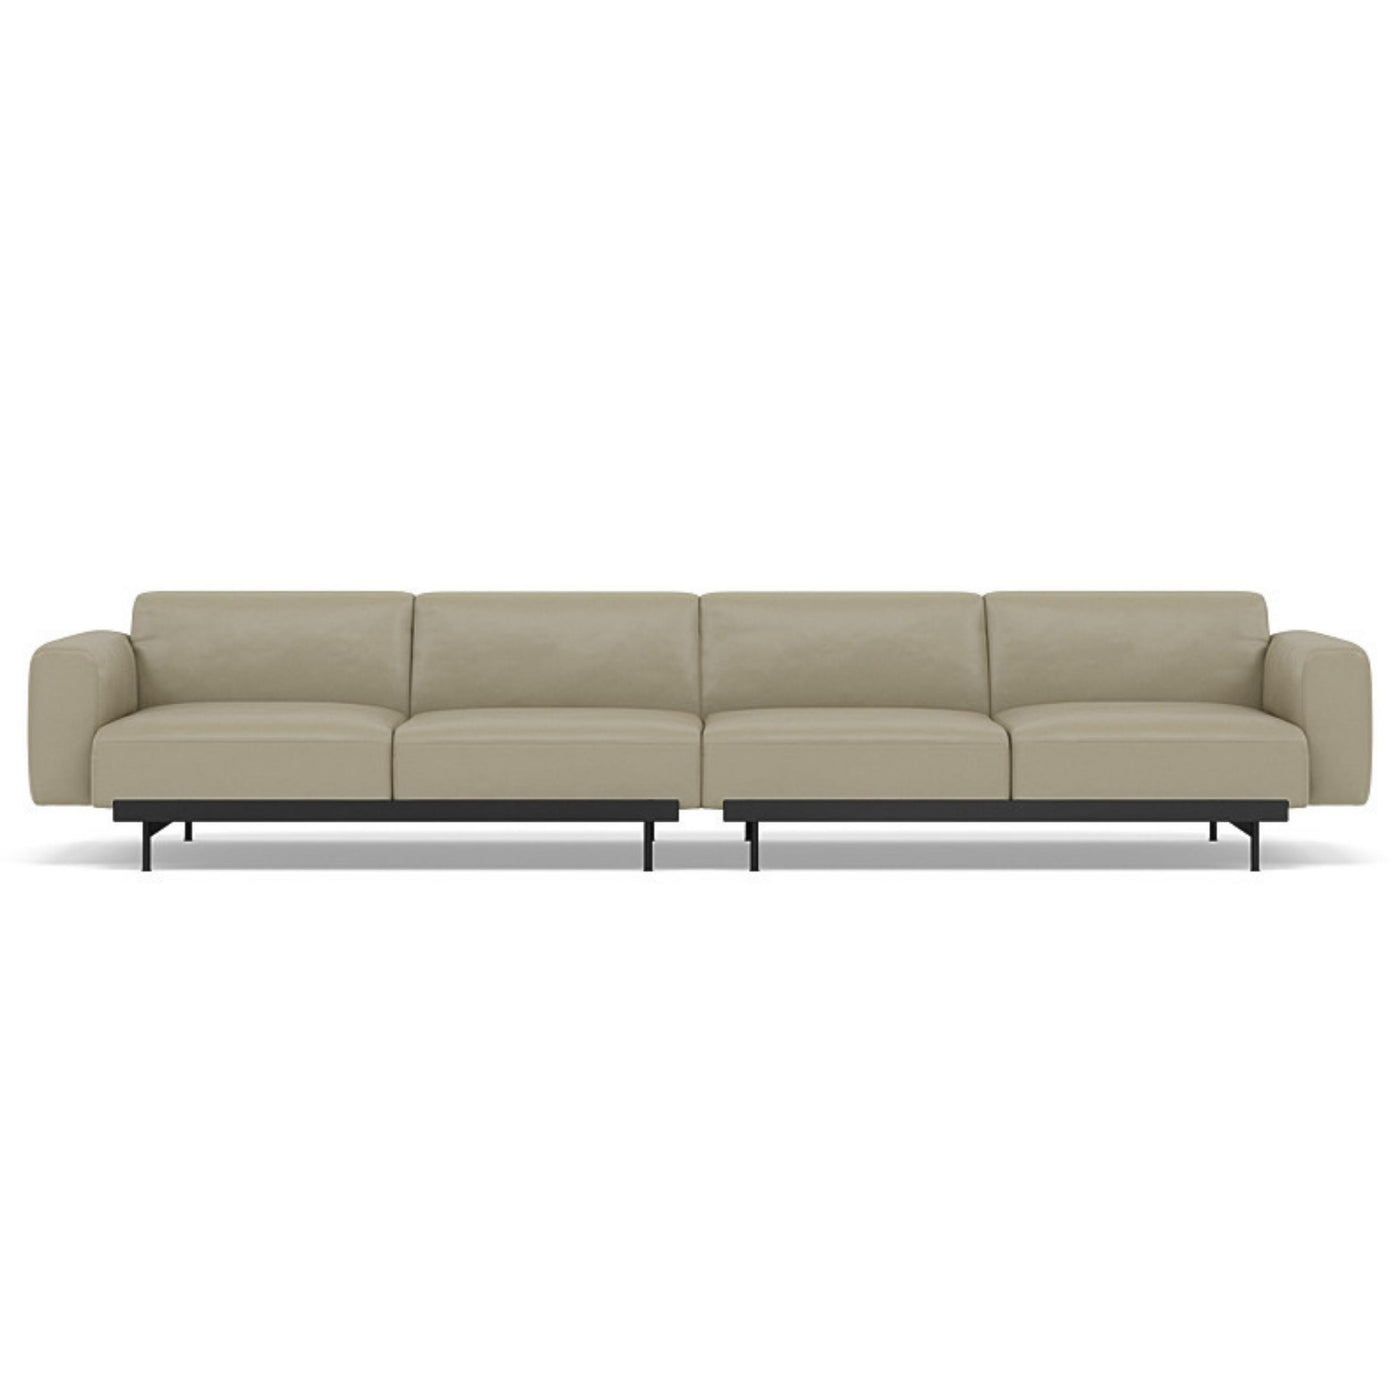 Muuto In Situ Modular 4 Seater Sofa configuration 1.  Made to order from someday designs. #colour_stone-refine-leather